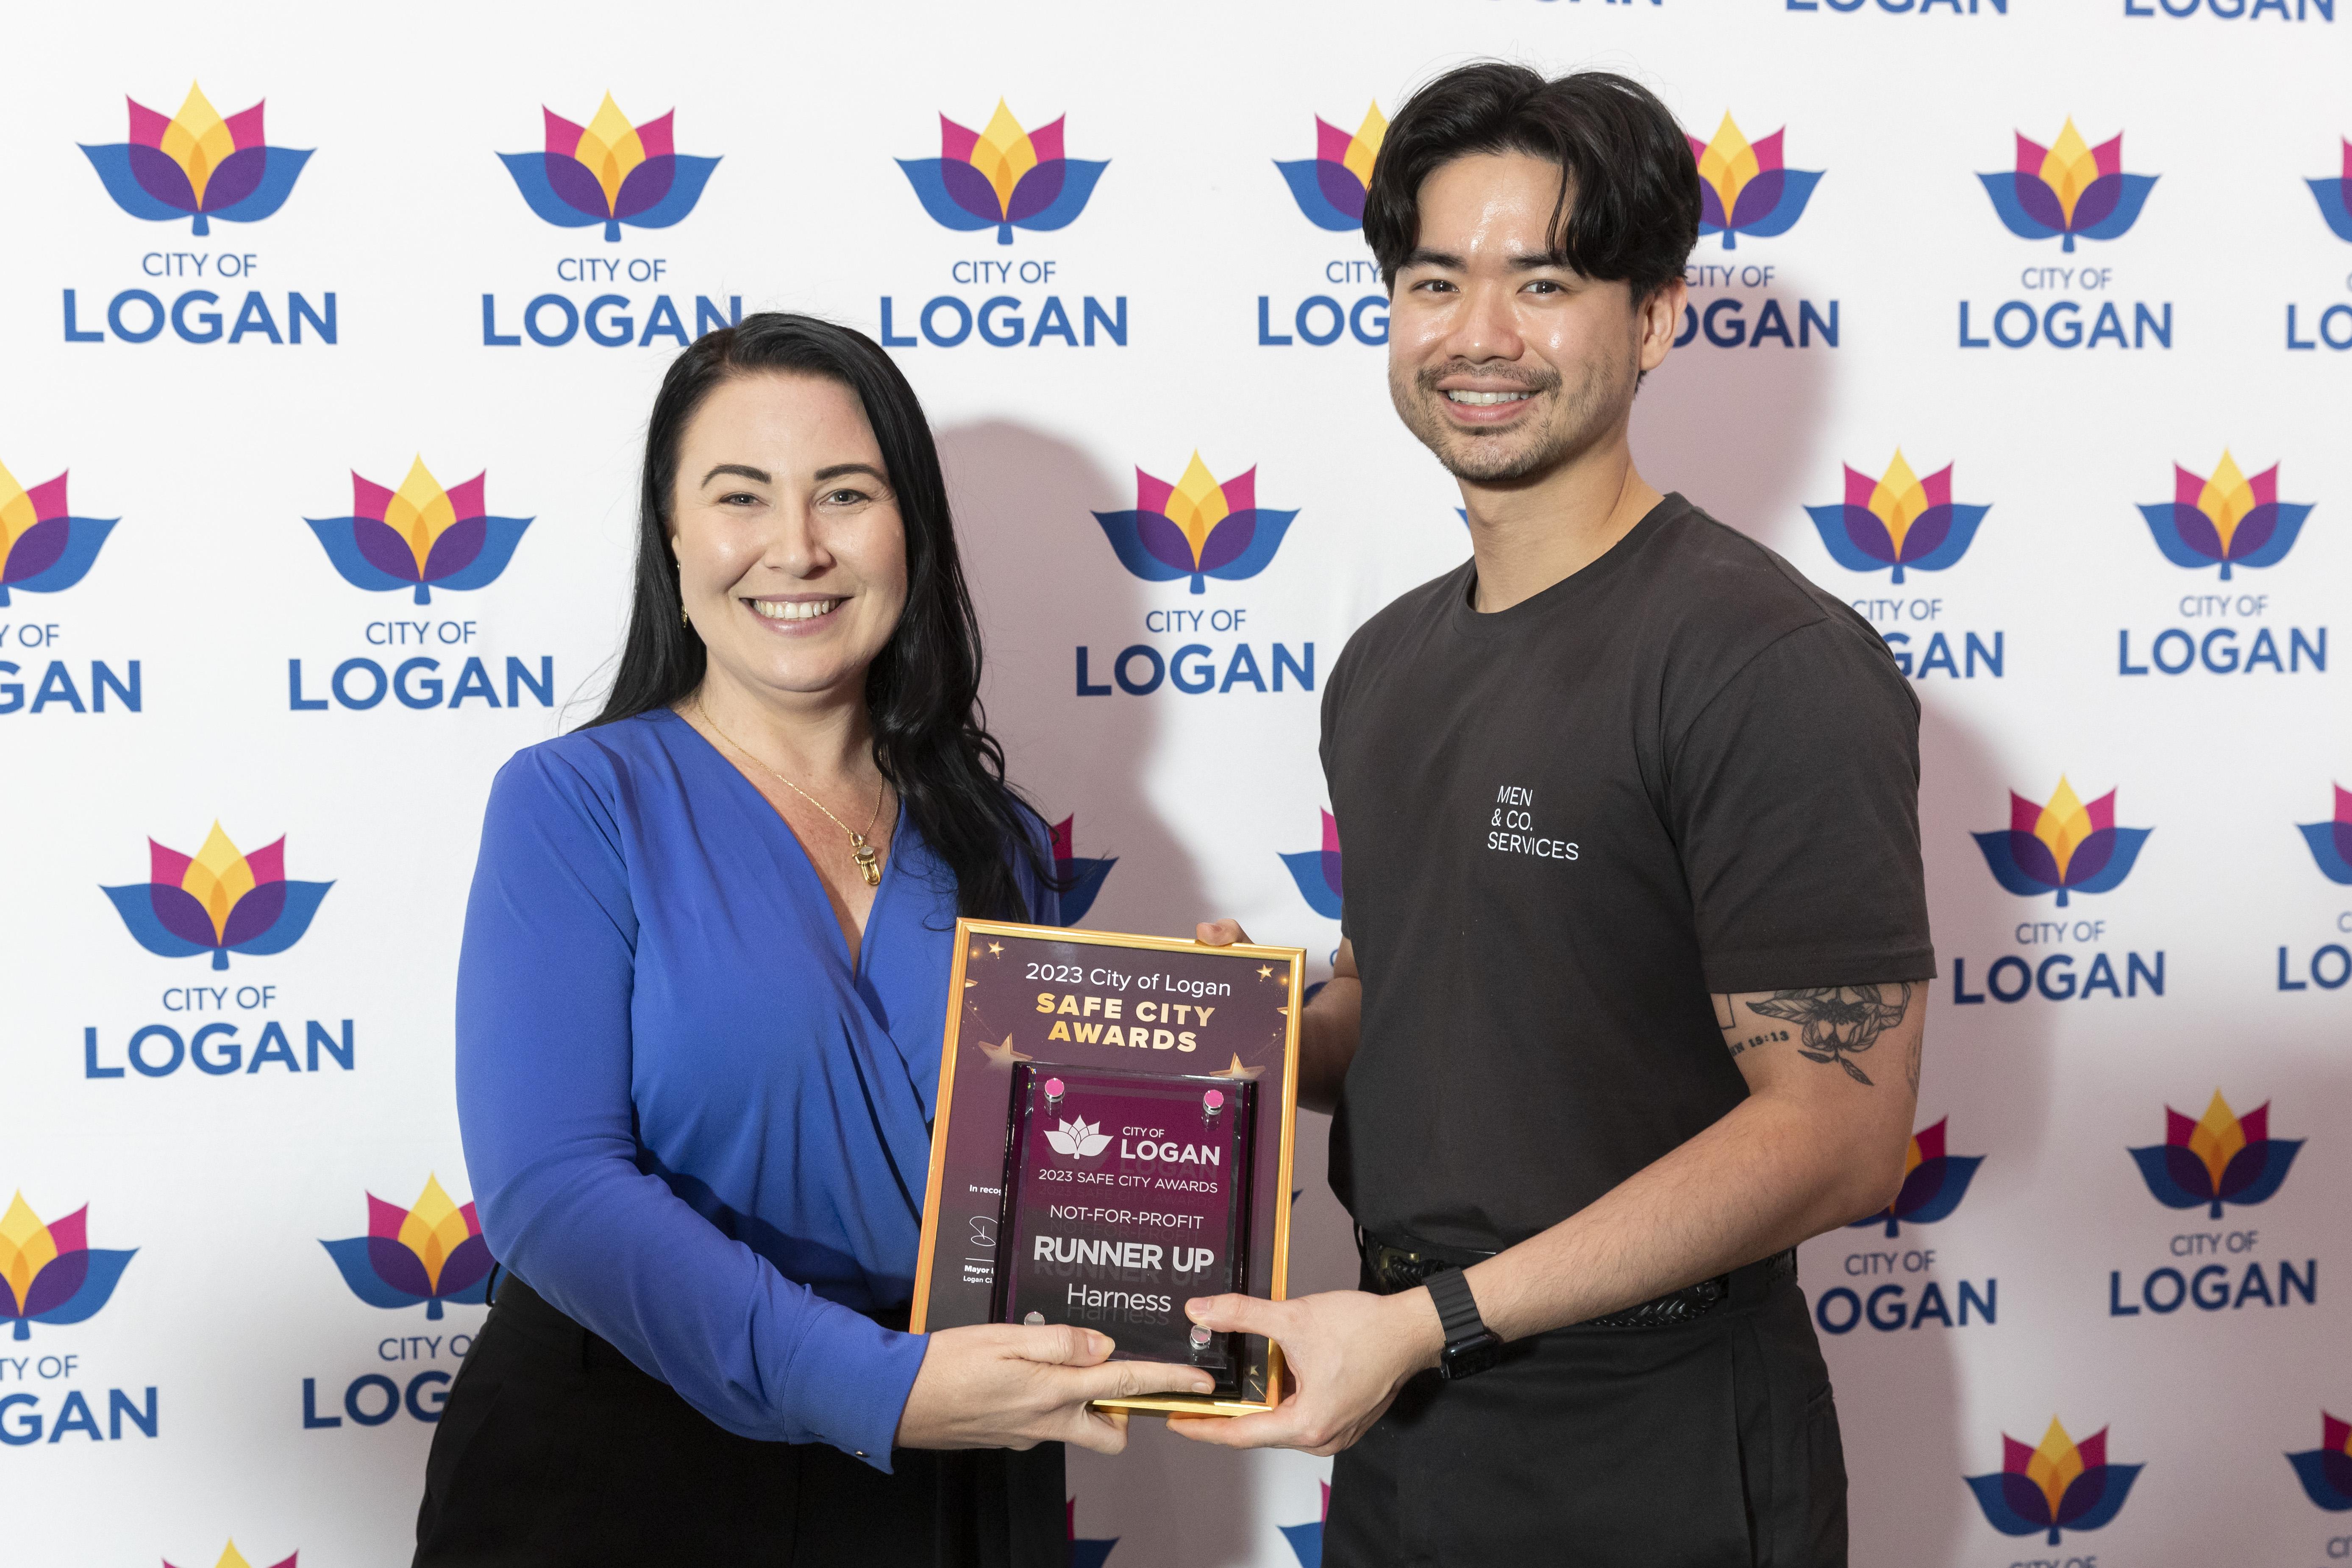 Not-For-Profit category runner-up Sidney Wong from Harness with Cr Mindy Russell at City of Logan Safe City Awards